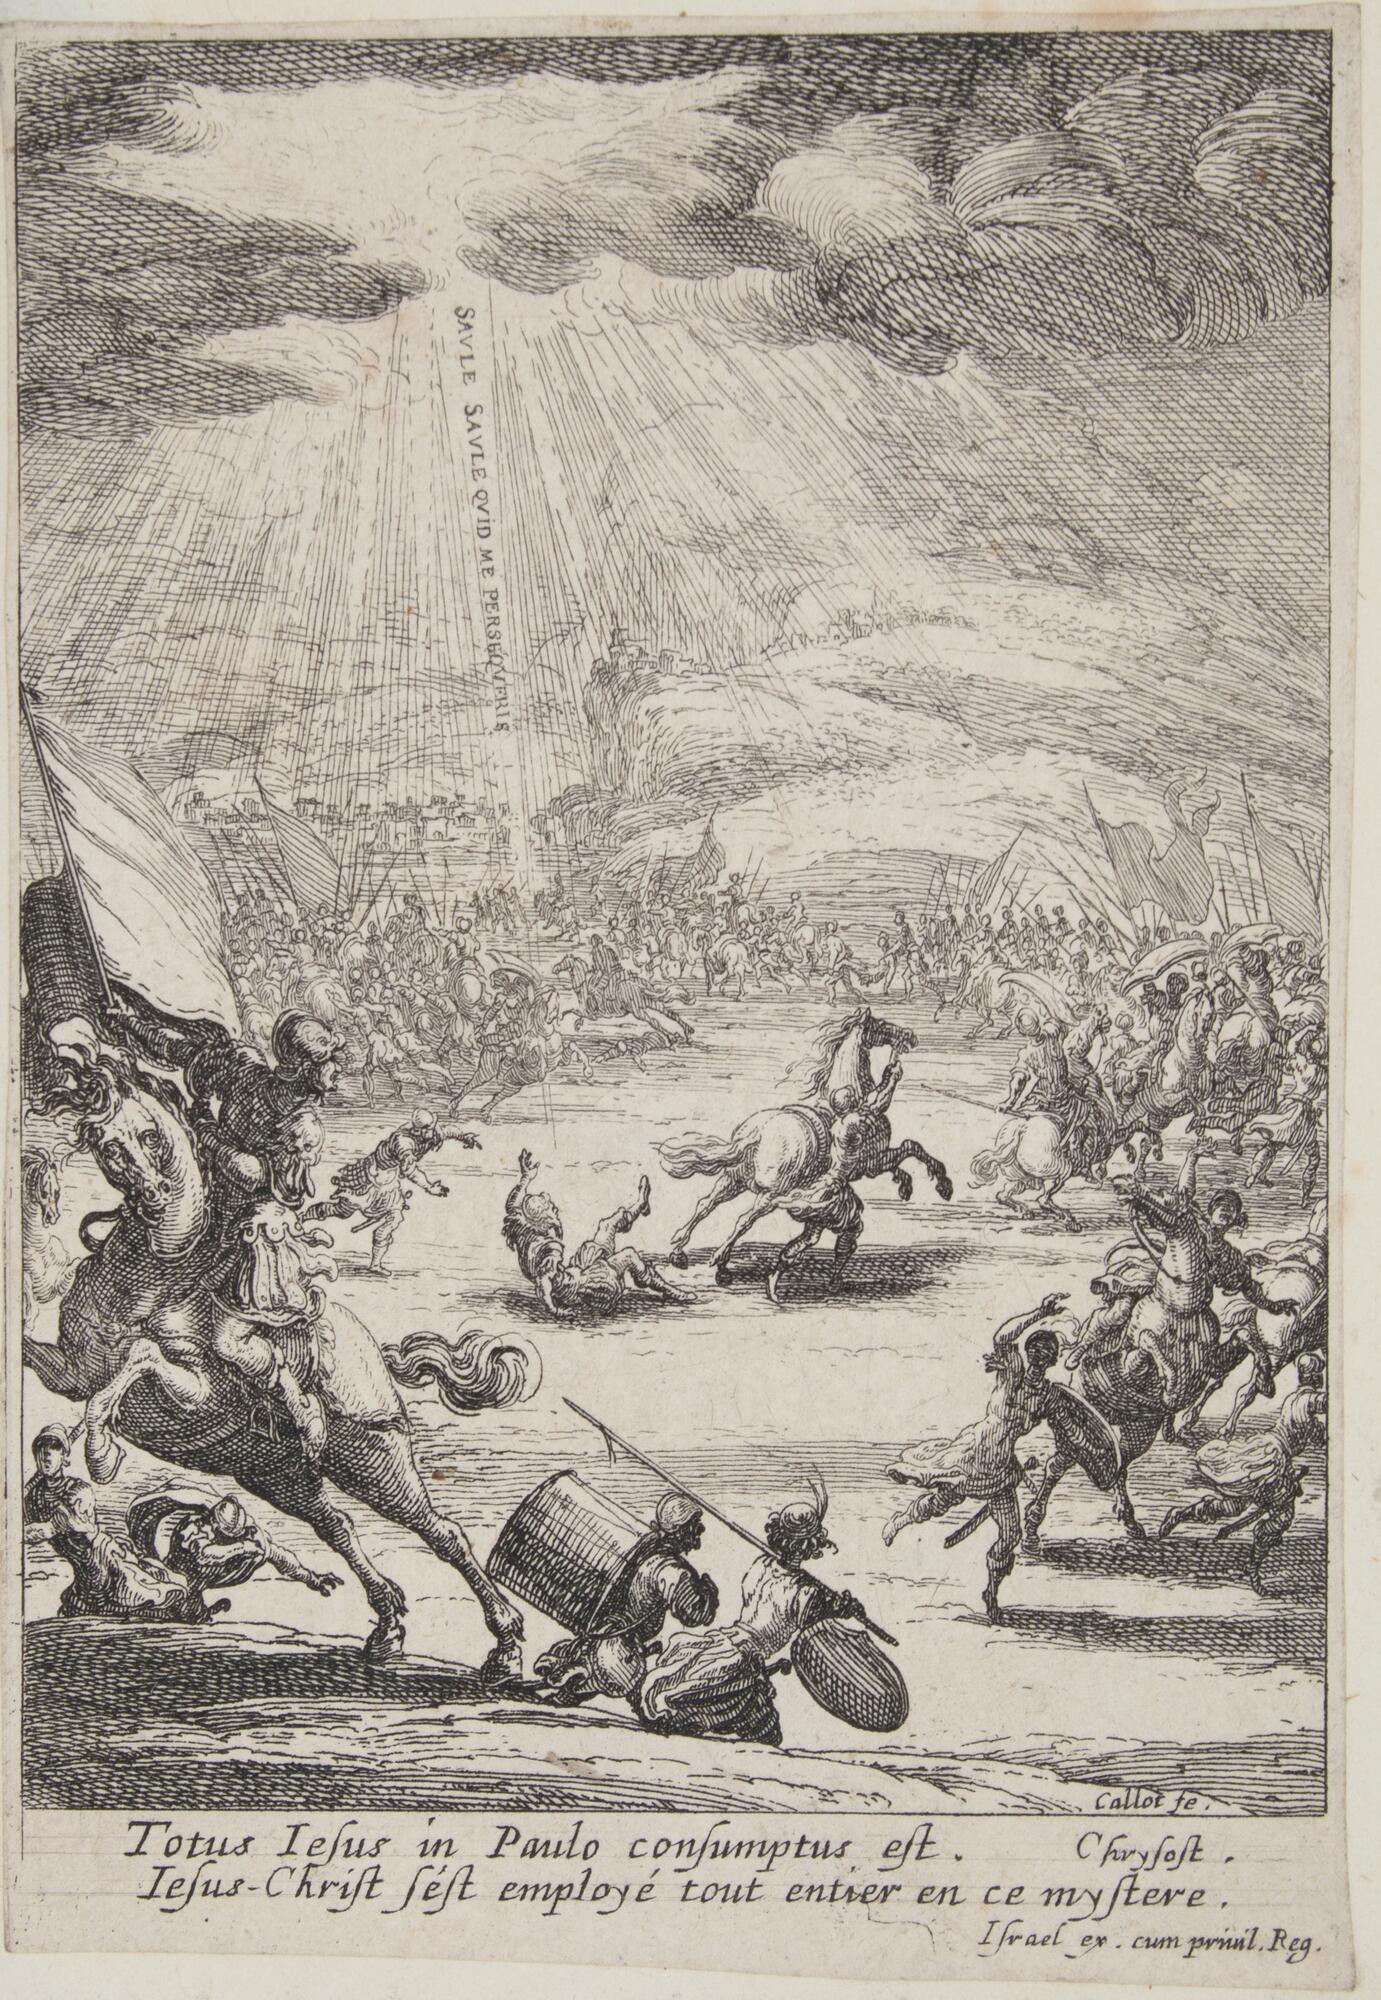 A battle scene with the sun&#39;s rays shining down through the clouds. At the center, a man has fallen from his horse and lays on the ground. From the clouds above, a voice comes down, inscribed &quot;SAVLE SAVLE QVID ME PERSEQVERIS.&quot; At base of print is written &quot;Totus lesus in Paulo consumptus est. Chrysost. Iesus-Christ s&#39;est enploy&eacute; tout entier en ce mystere.&quot;